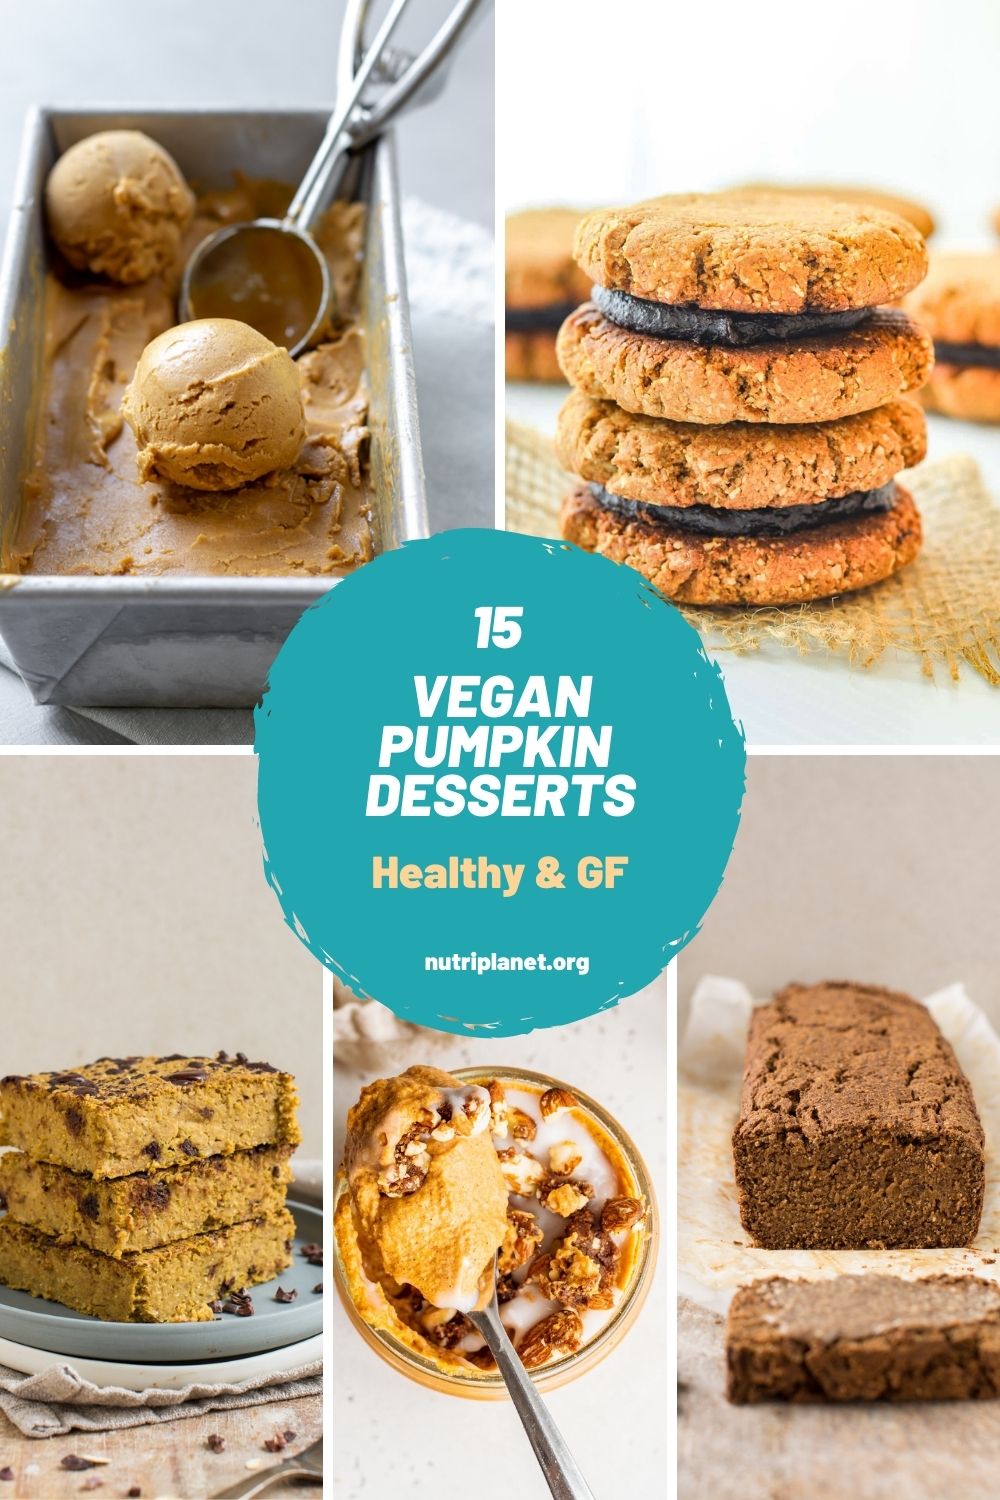 Learn how to make healthy vegan pumpkin dessert recipes. From pumpkin pie, blondies, brownies and ice cream to pumpkin mousse, cheesecake and cookies.